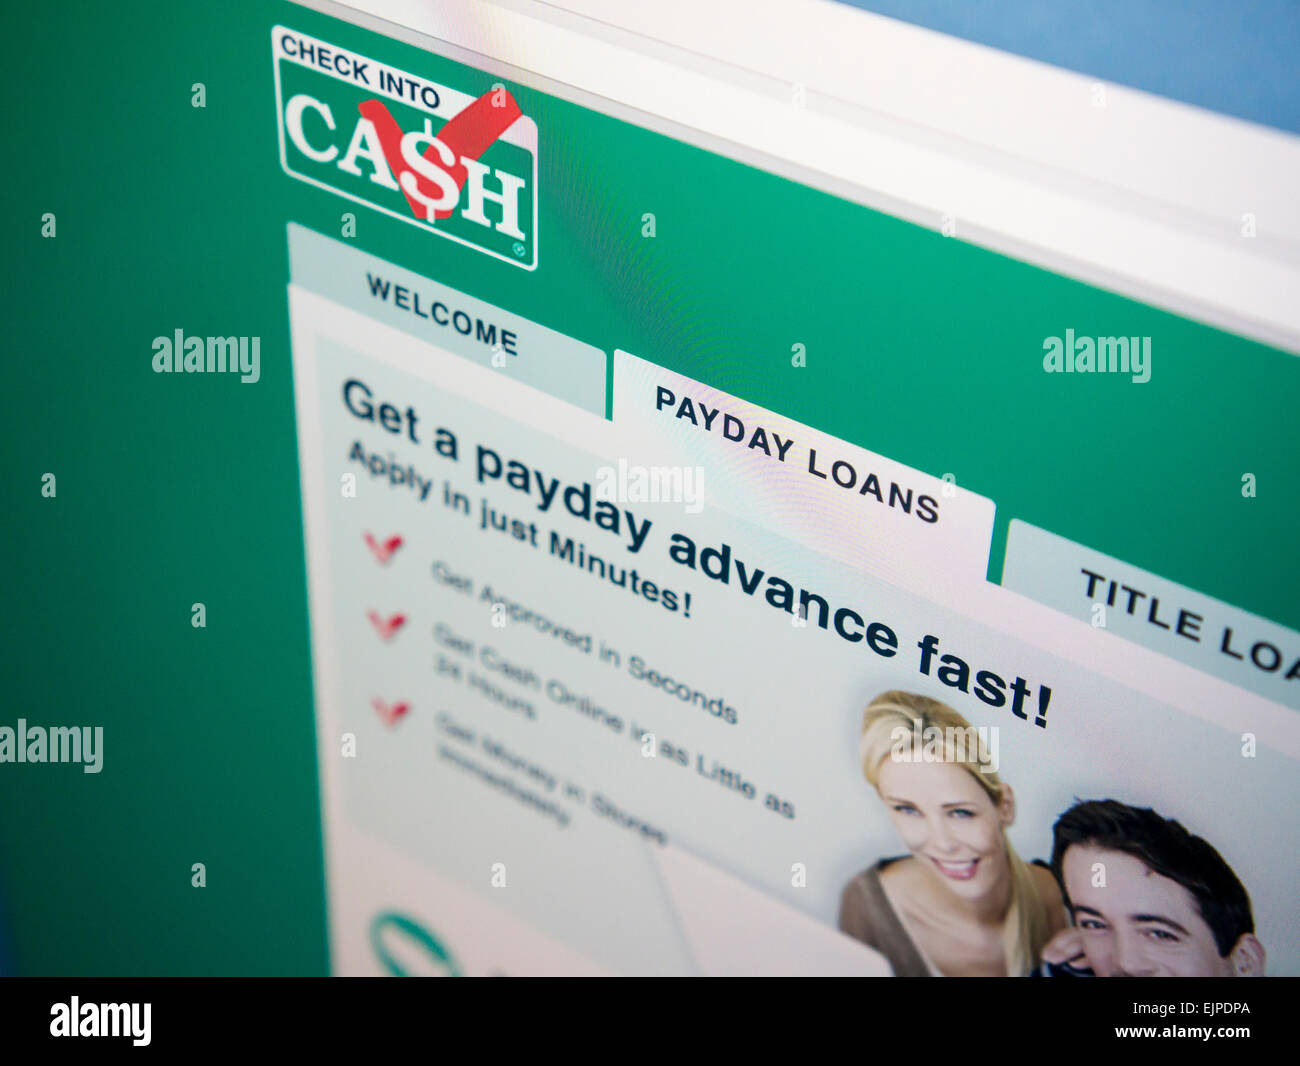 A website promoting their payday loan services is seen on Thursday, March 26, 2015. The U.S. Consumer Financial Protection Bureau has announced plans for regulations to crack down on payday loans which have the potential to trap consumers in an endless cycle of debt. Payday loans are short term loans at high interest rates that make it difficult for borrowers to pay back, hence the borrower must refinance the first loan. (© Richard B. Levine) Stock Photo